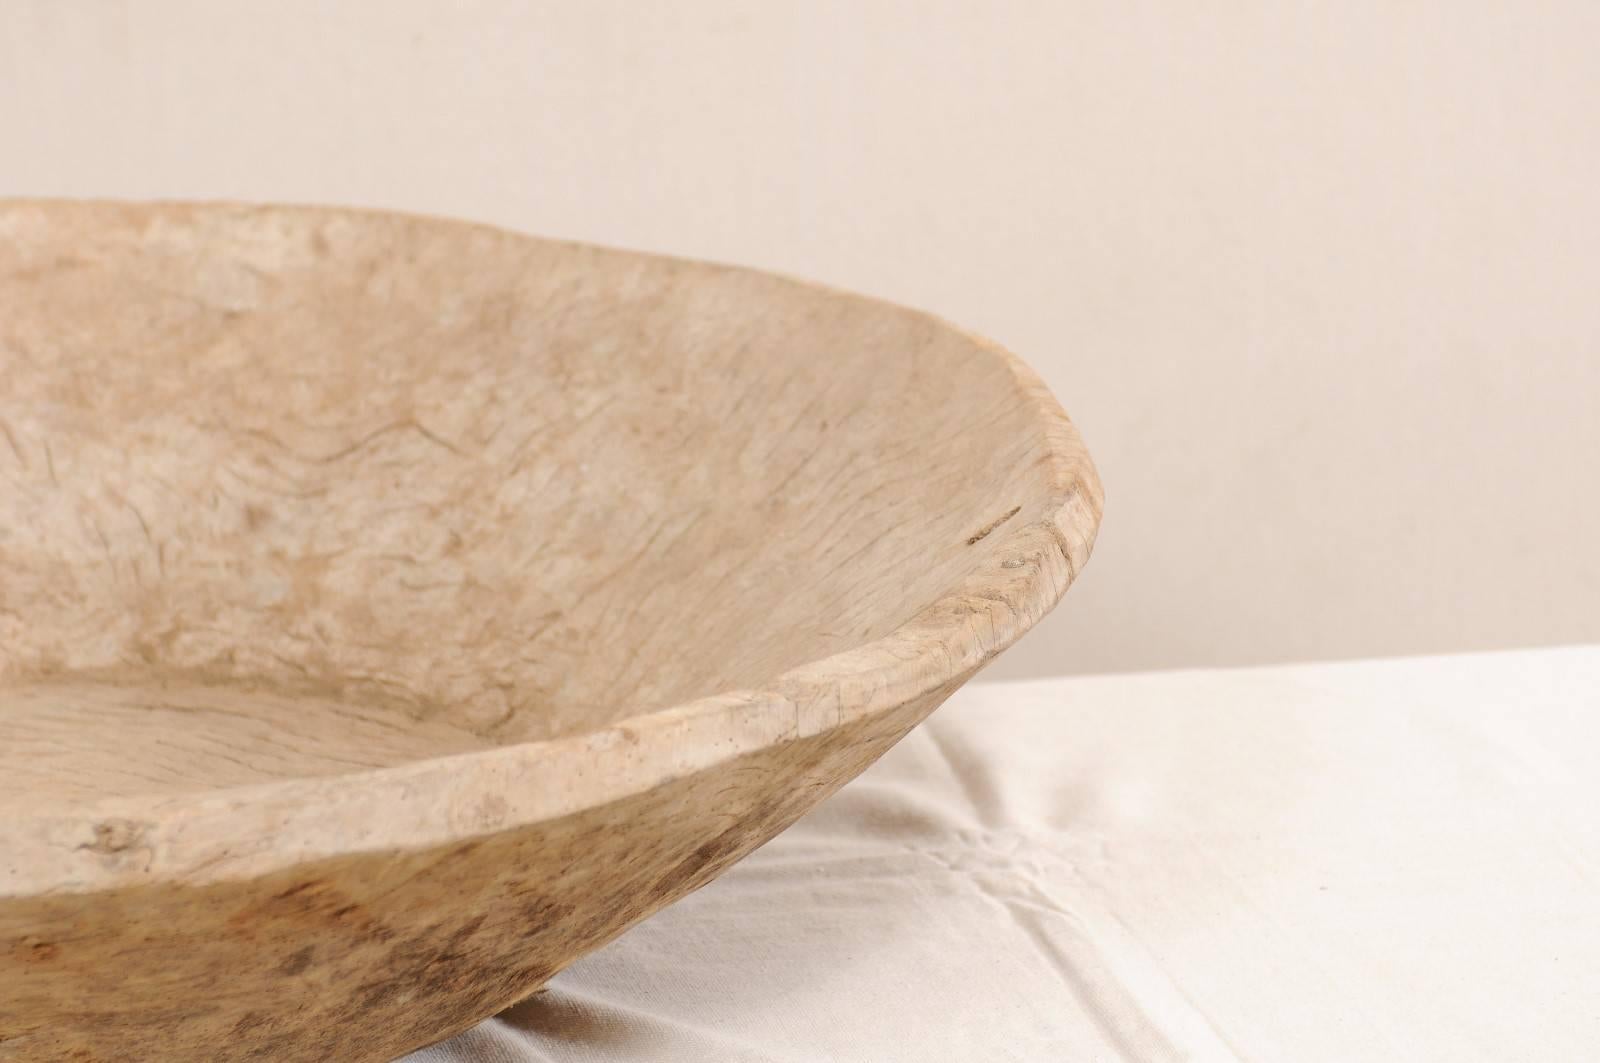 19th Century Oversized European Rustic Antique Hand-Carved Burl Wood Bowl with Round Shape